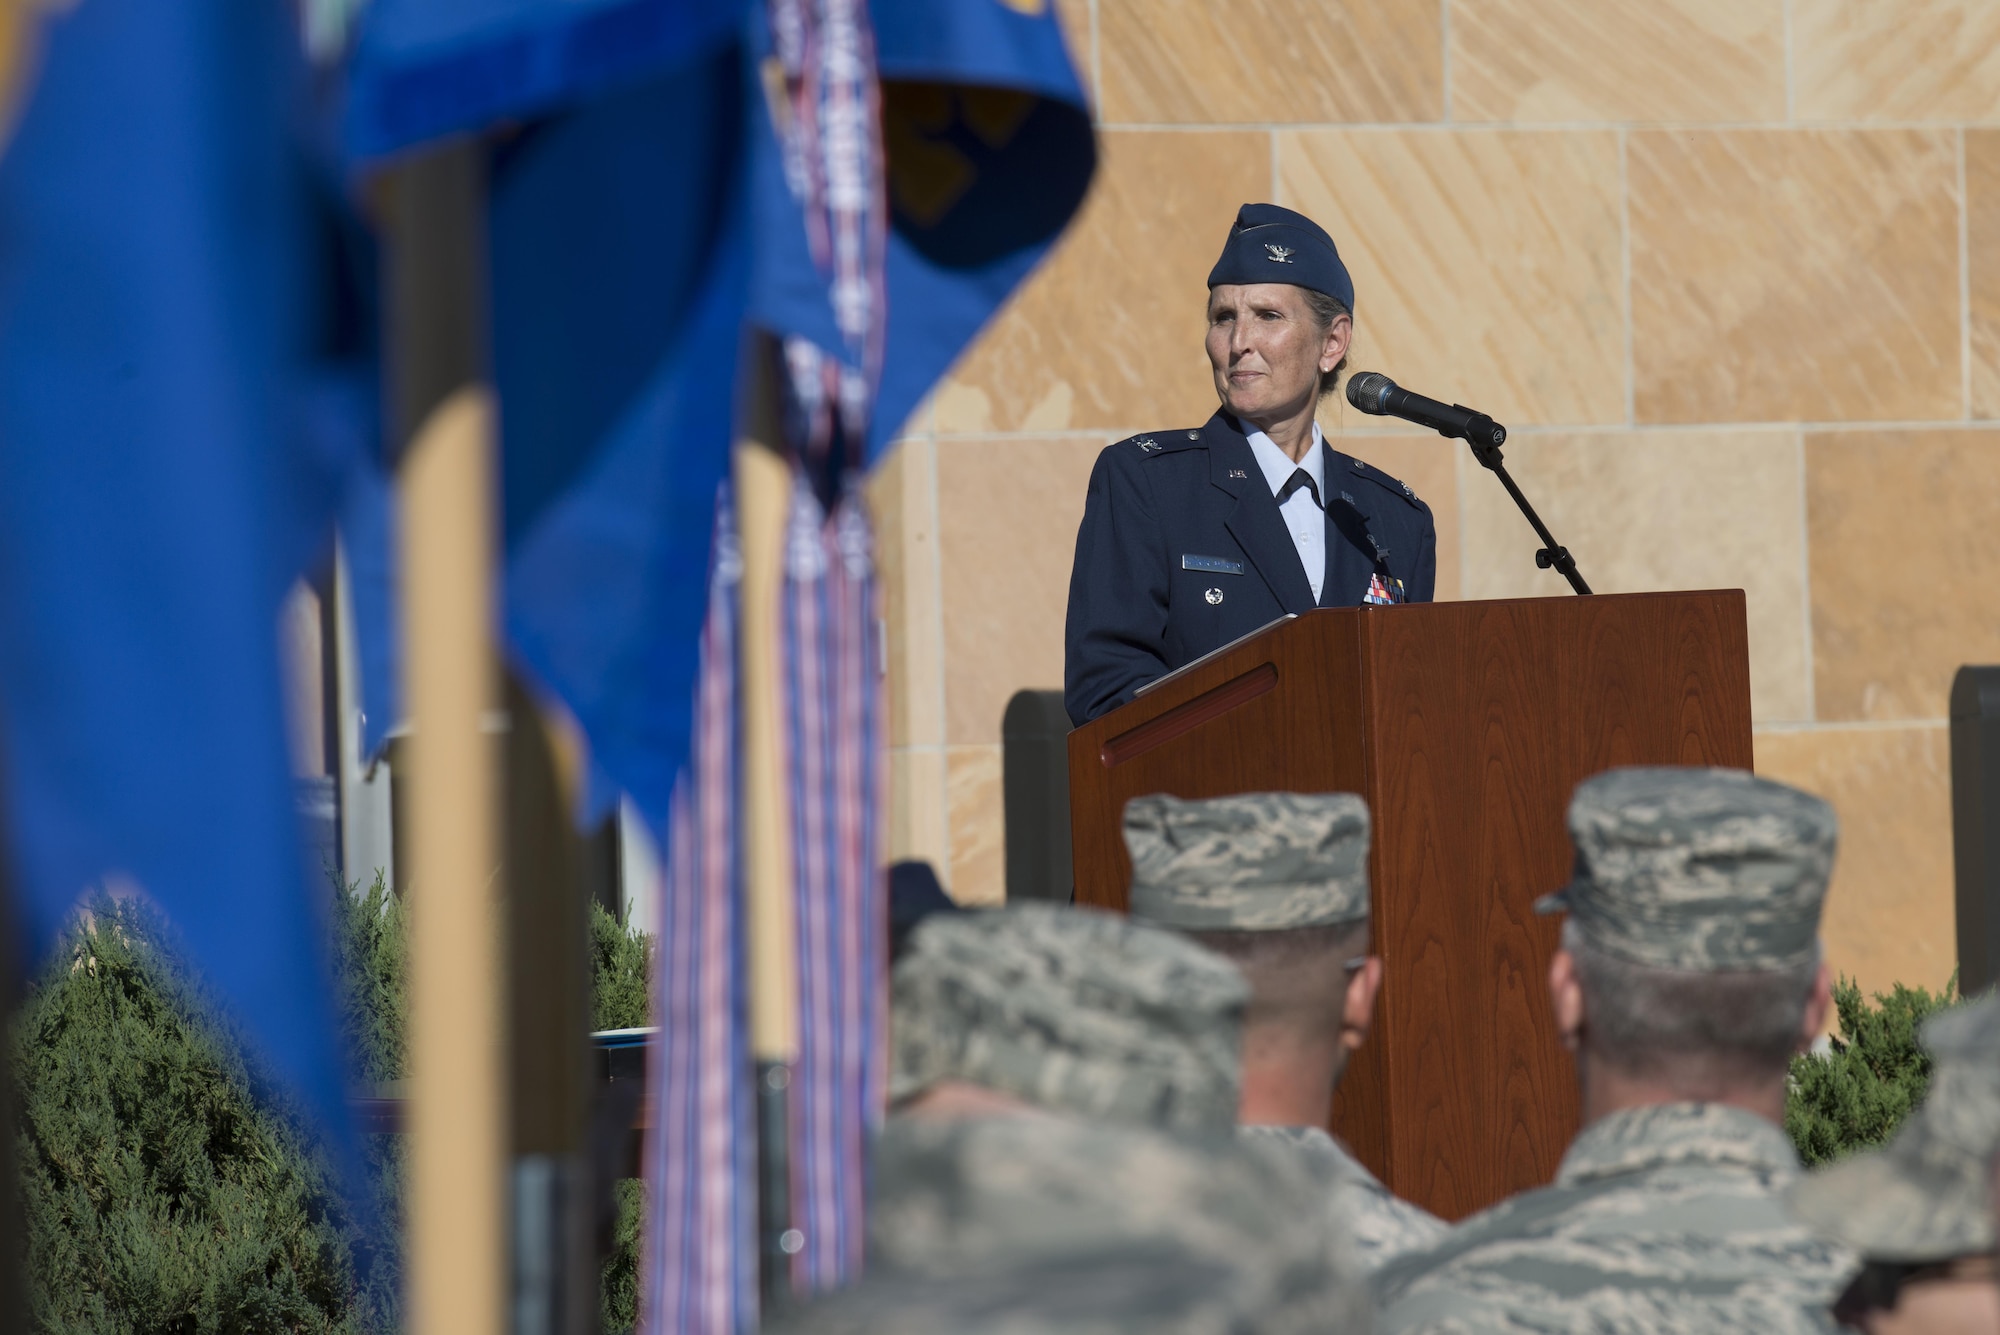 Col. Traci L. Kueker-Murphy addresses the audience as she assumes command of the 310th Space Wing during the change of command ceremony for the 310th Space Wing on Schriever AFB, Colo., Sept. 17, 2016. 
(U.S. Air Force photo by Staff Sgt. Christopher Moore/Released)